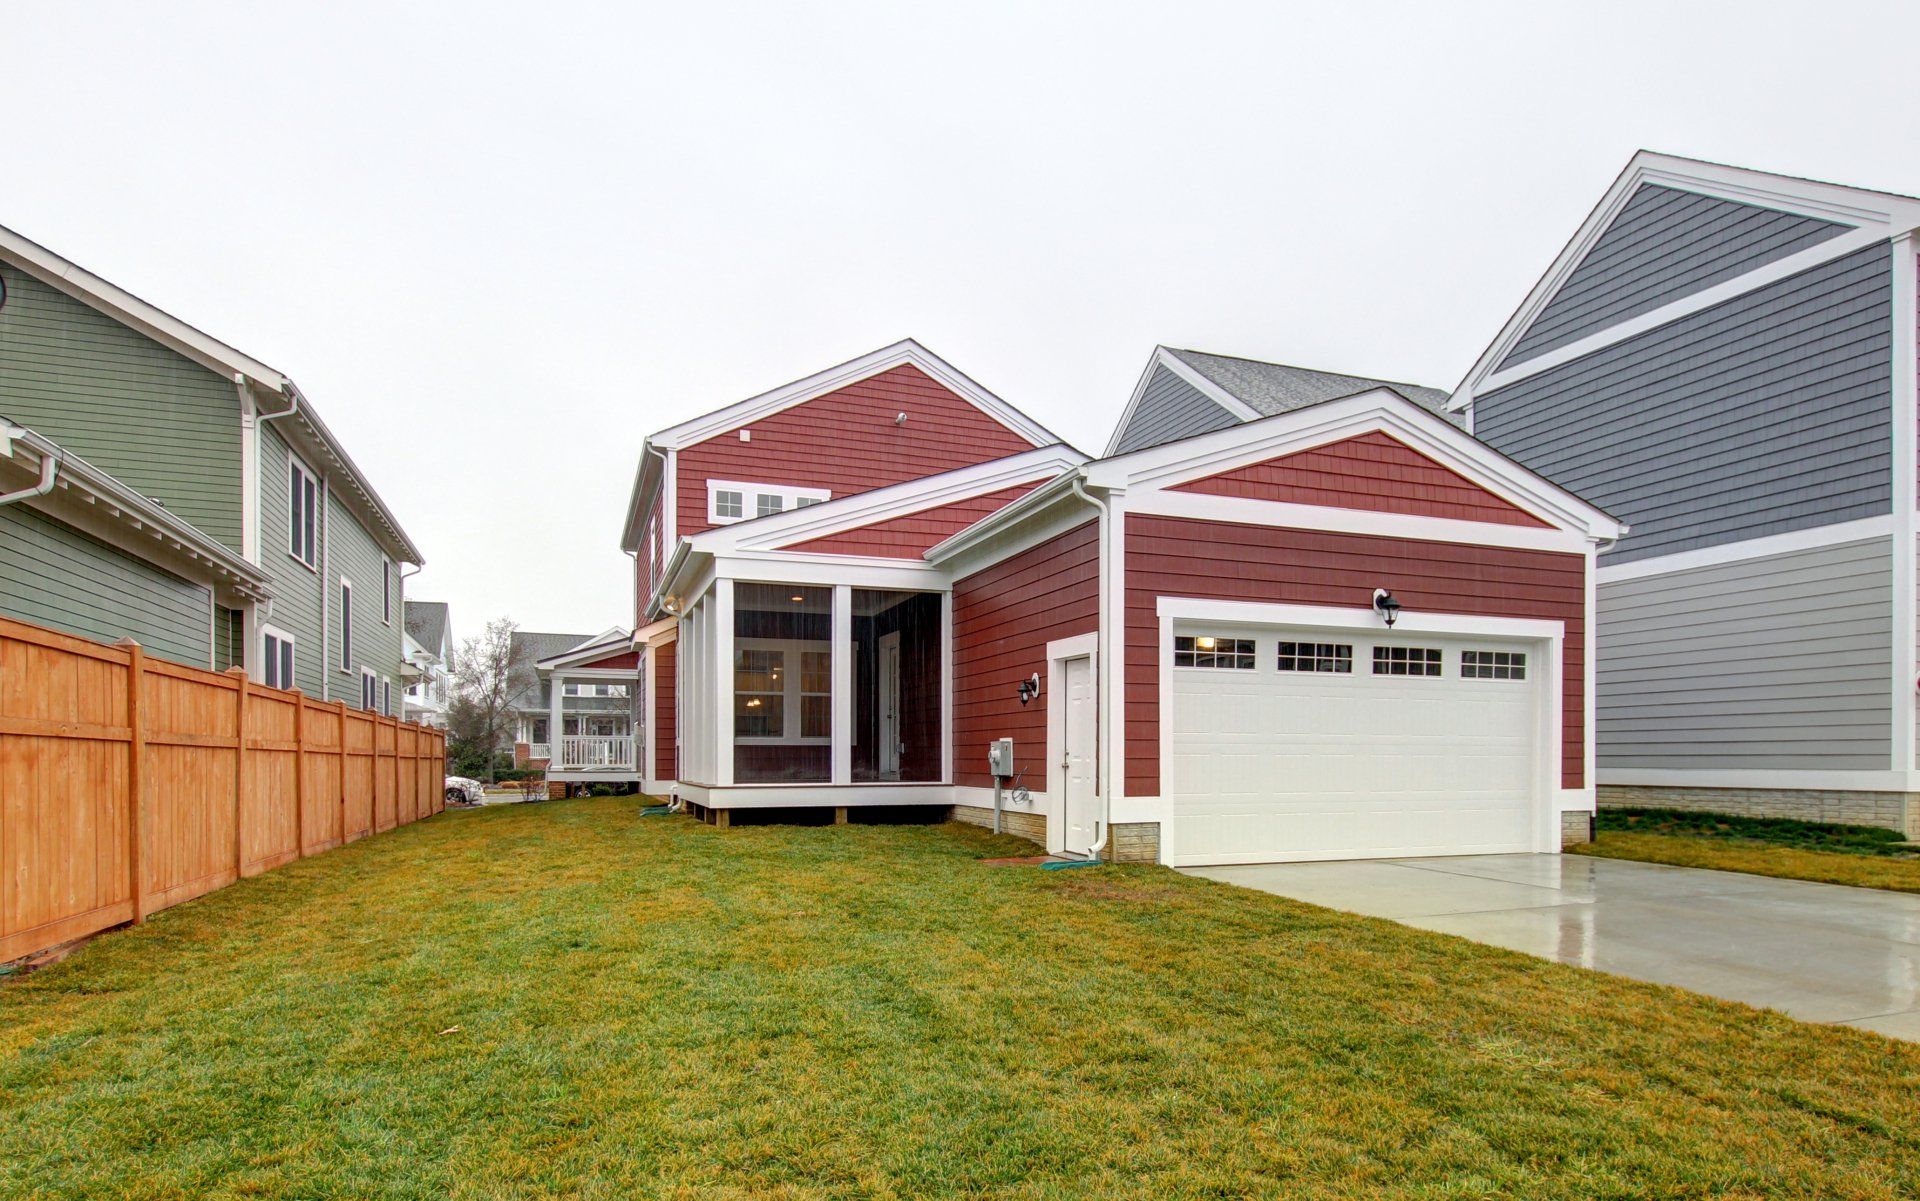 Red home exterior with garage | Galveston Legacy | Covell Communities | Chester, Maryland 21619